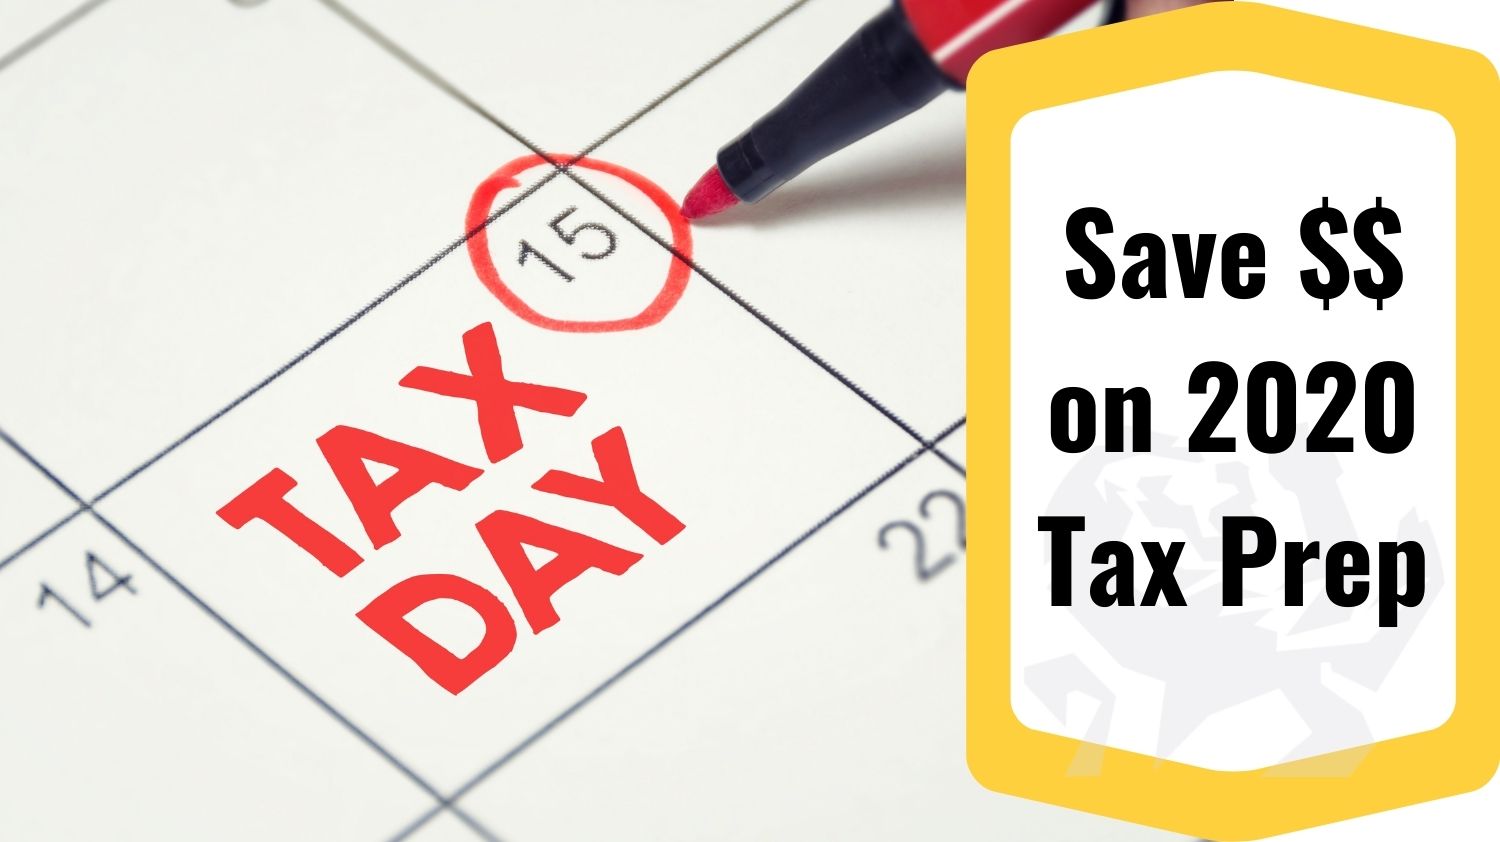 Save $, File Your Own Tax Return